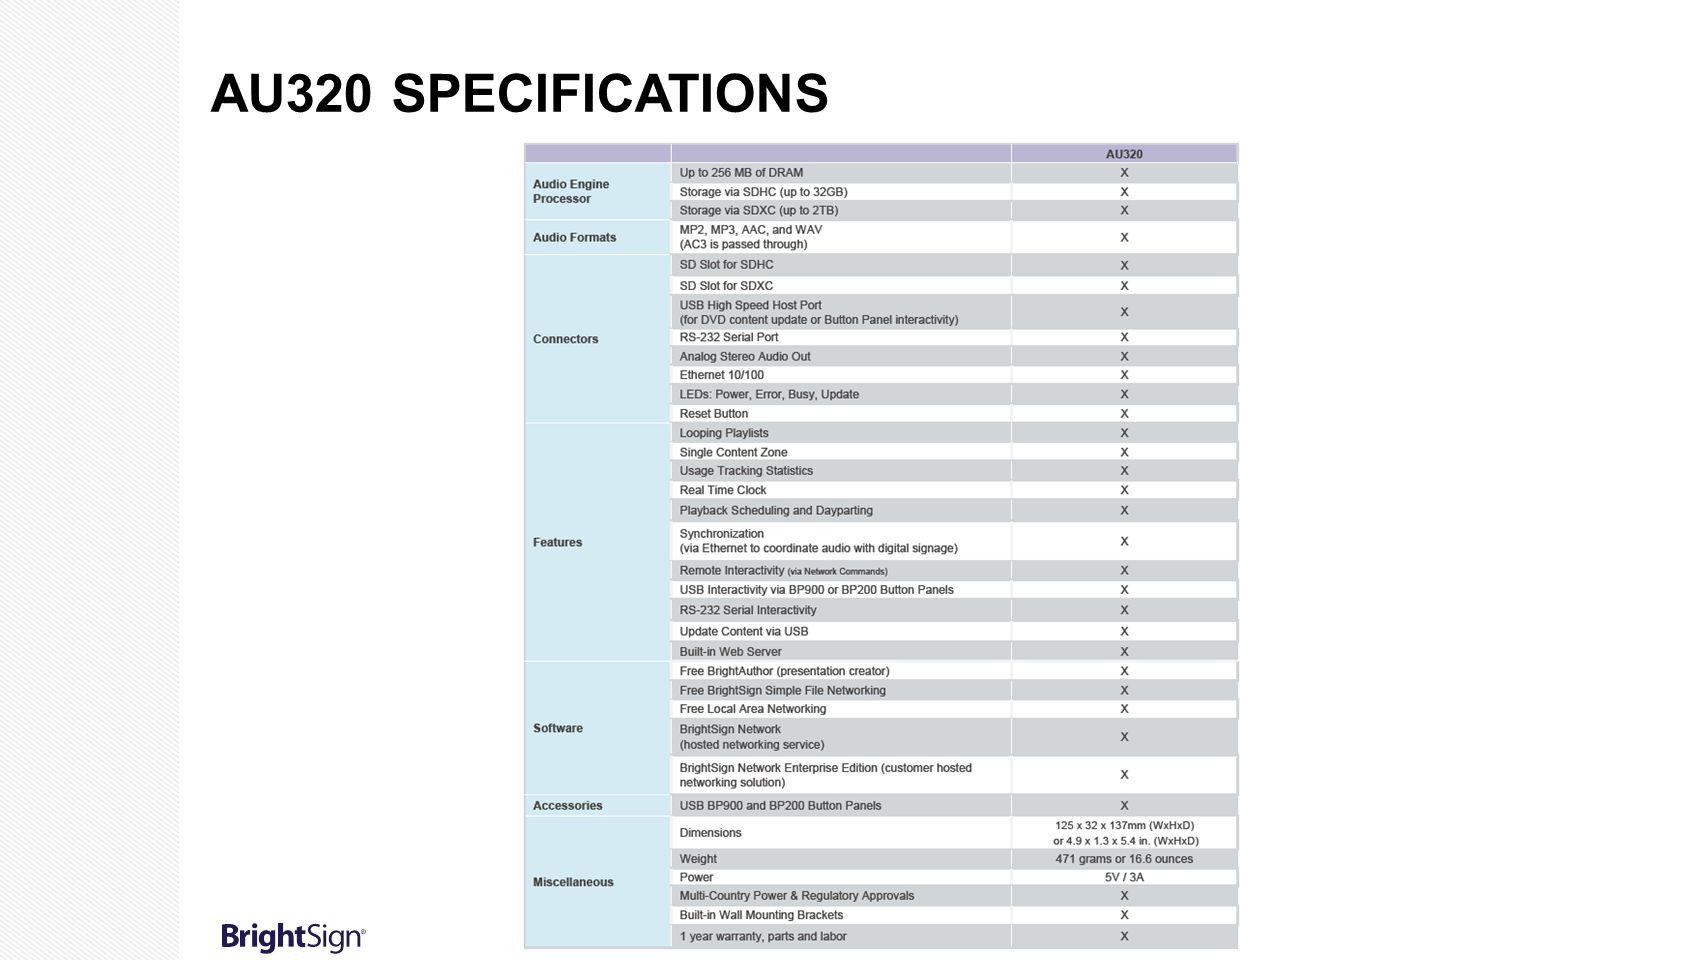 AU320 Specifications